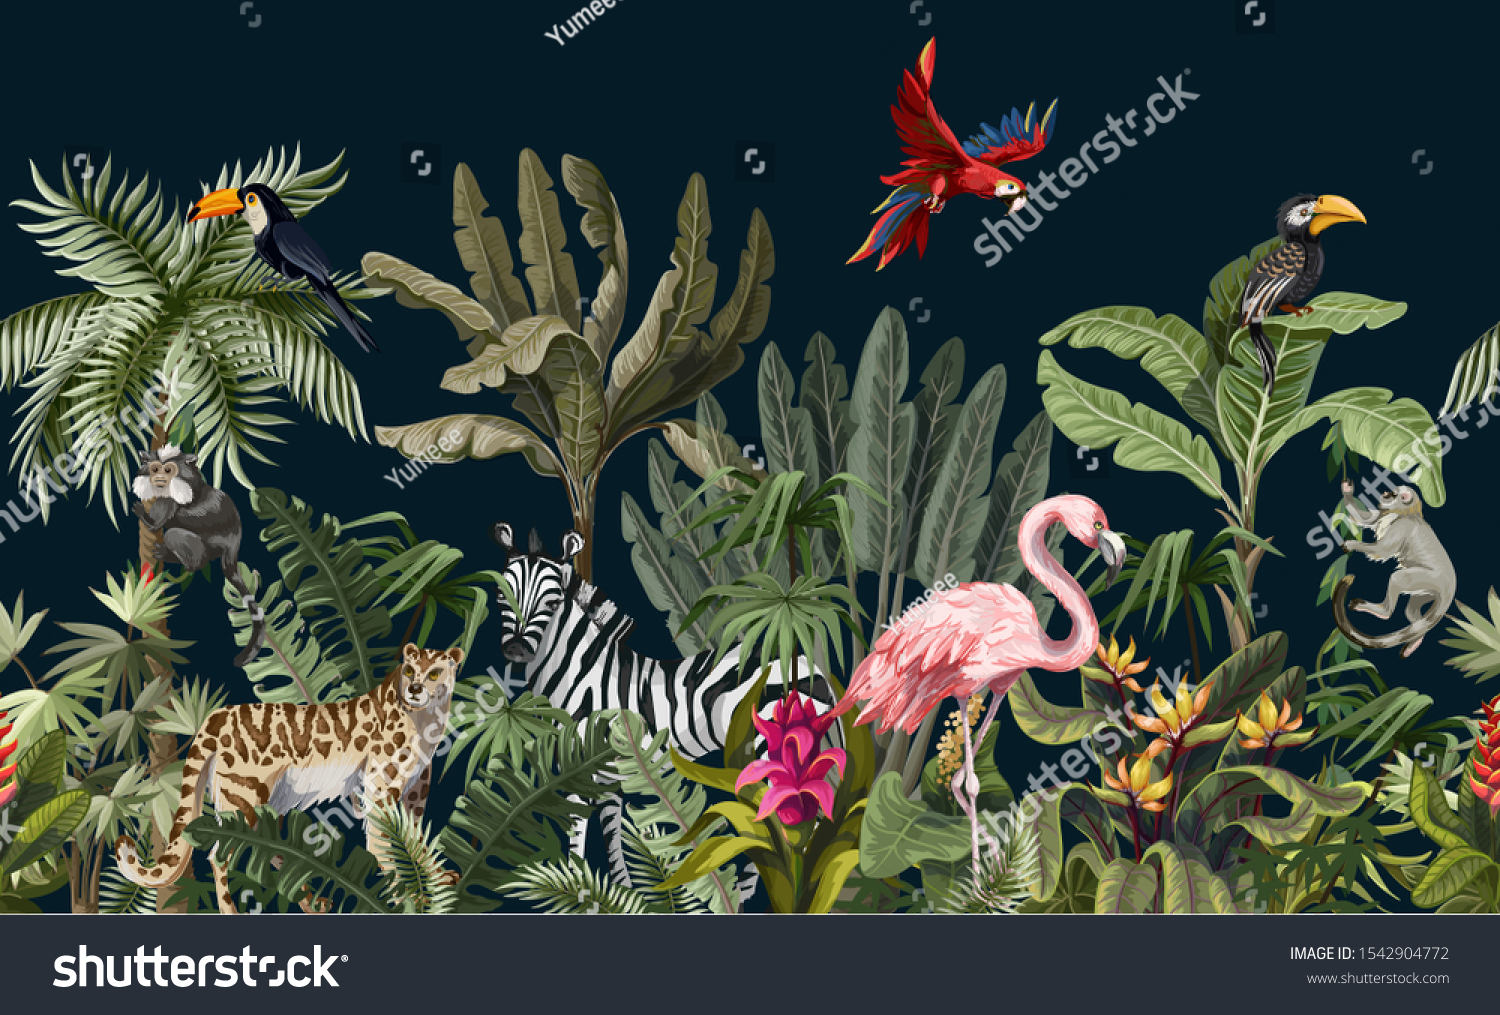 Seamless pattern with jungle animals, flowers and trees. Vector. #1542904772